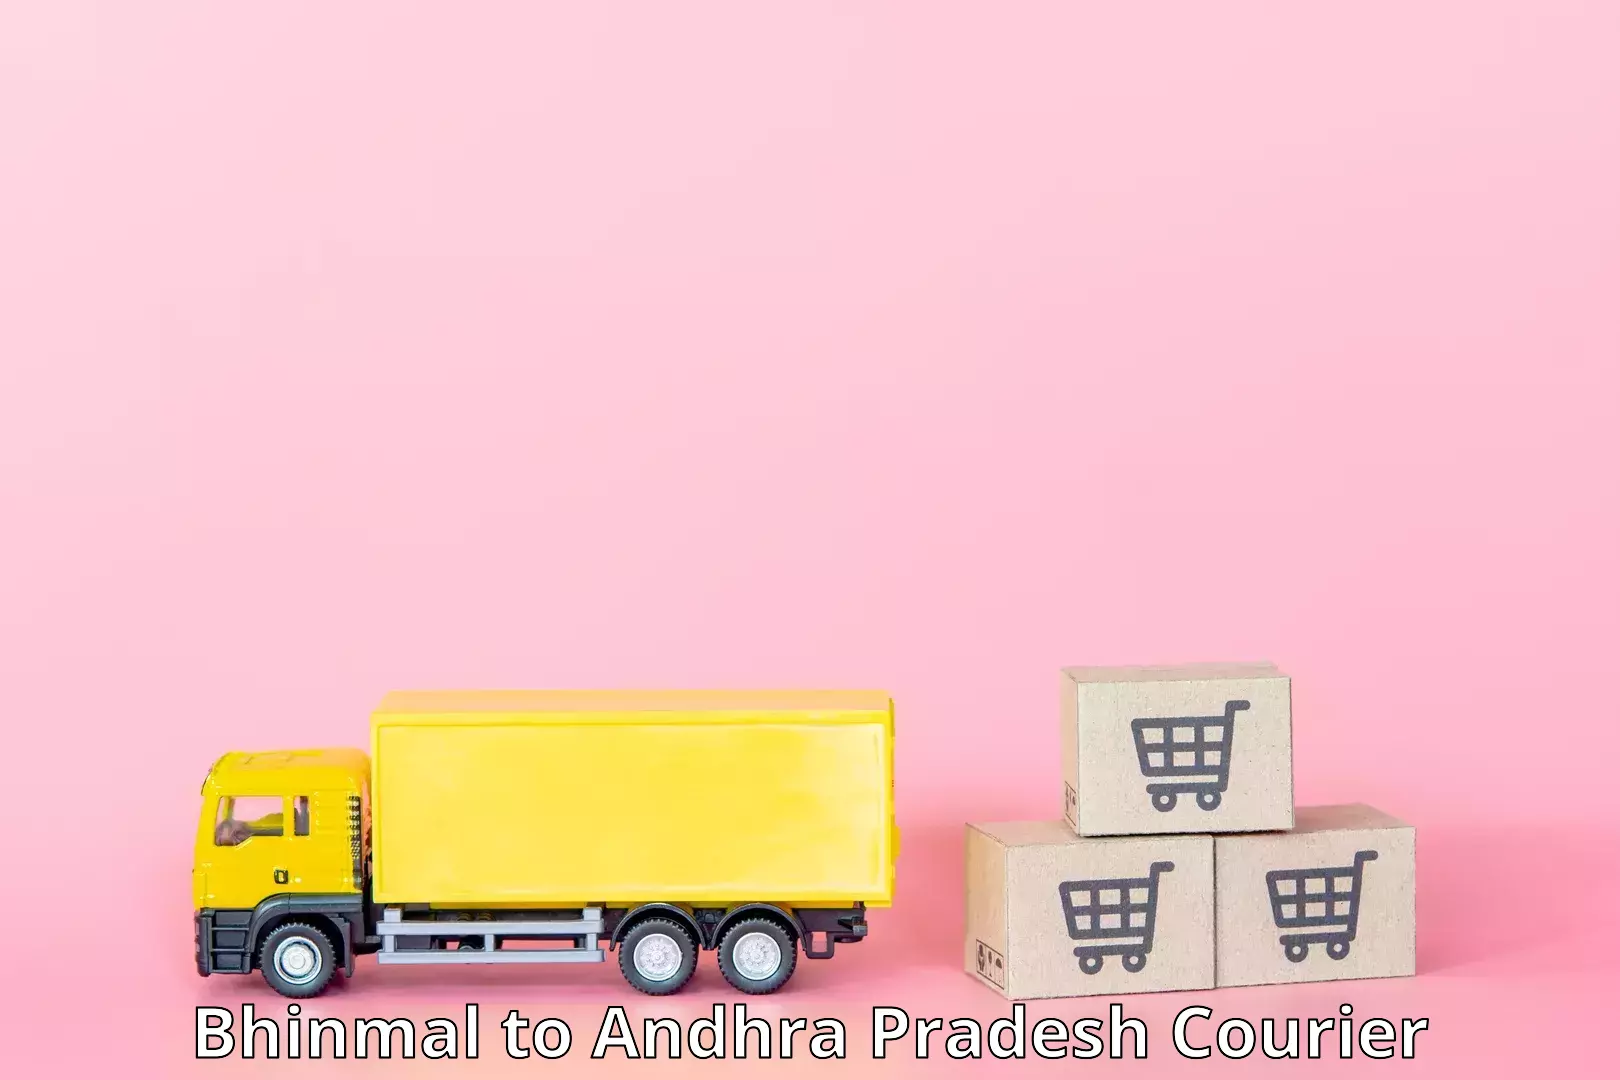 Express delivery capabilities Bhinmal to Andhra Pradesh